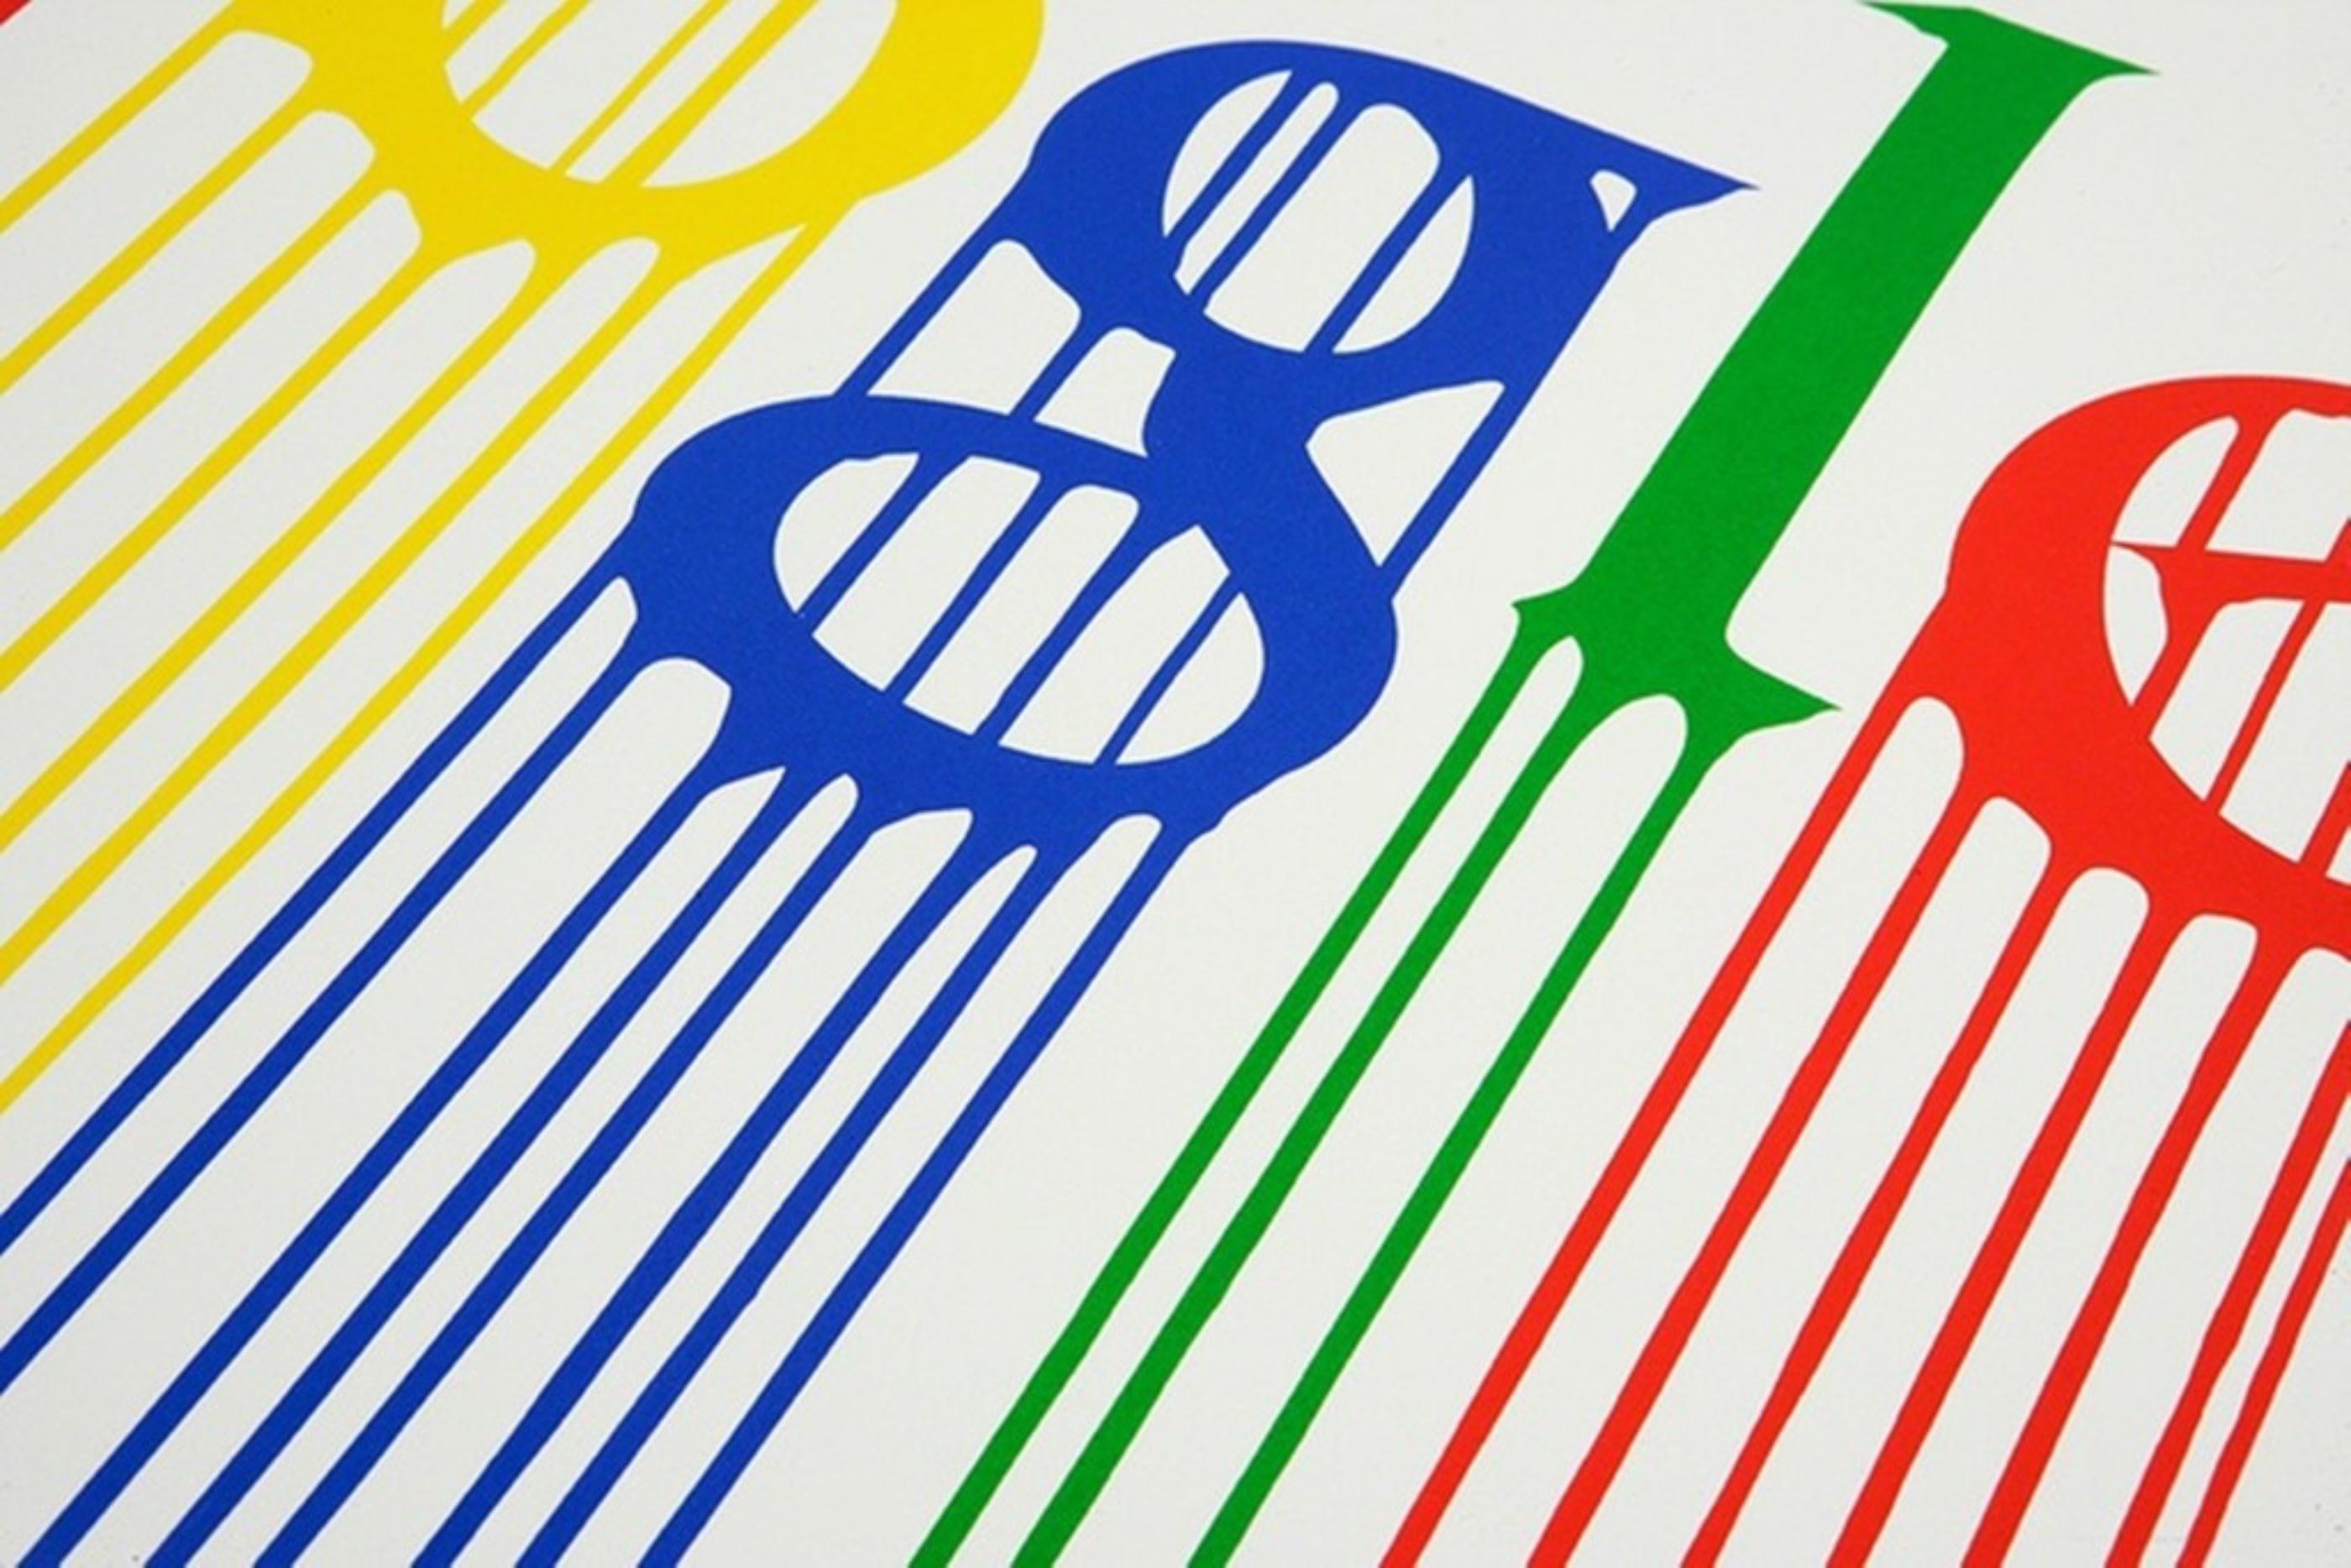 Liquidated Google (signed and numbered by major street and graffiti artist)  - Print by Zevs